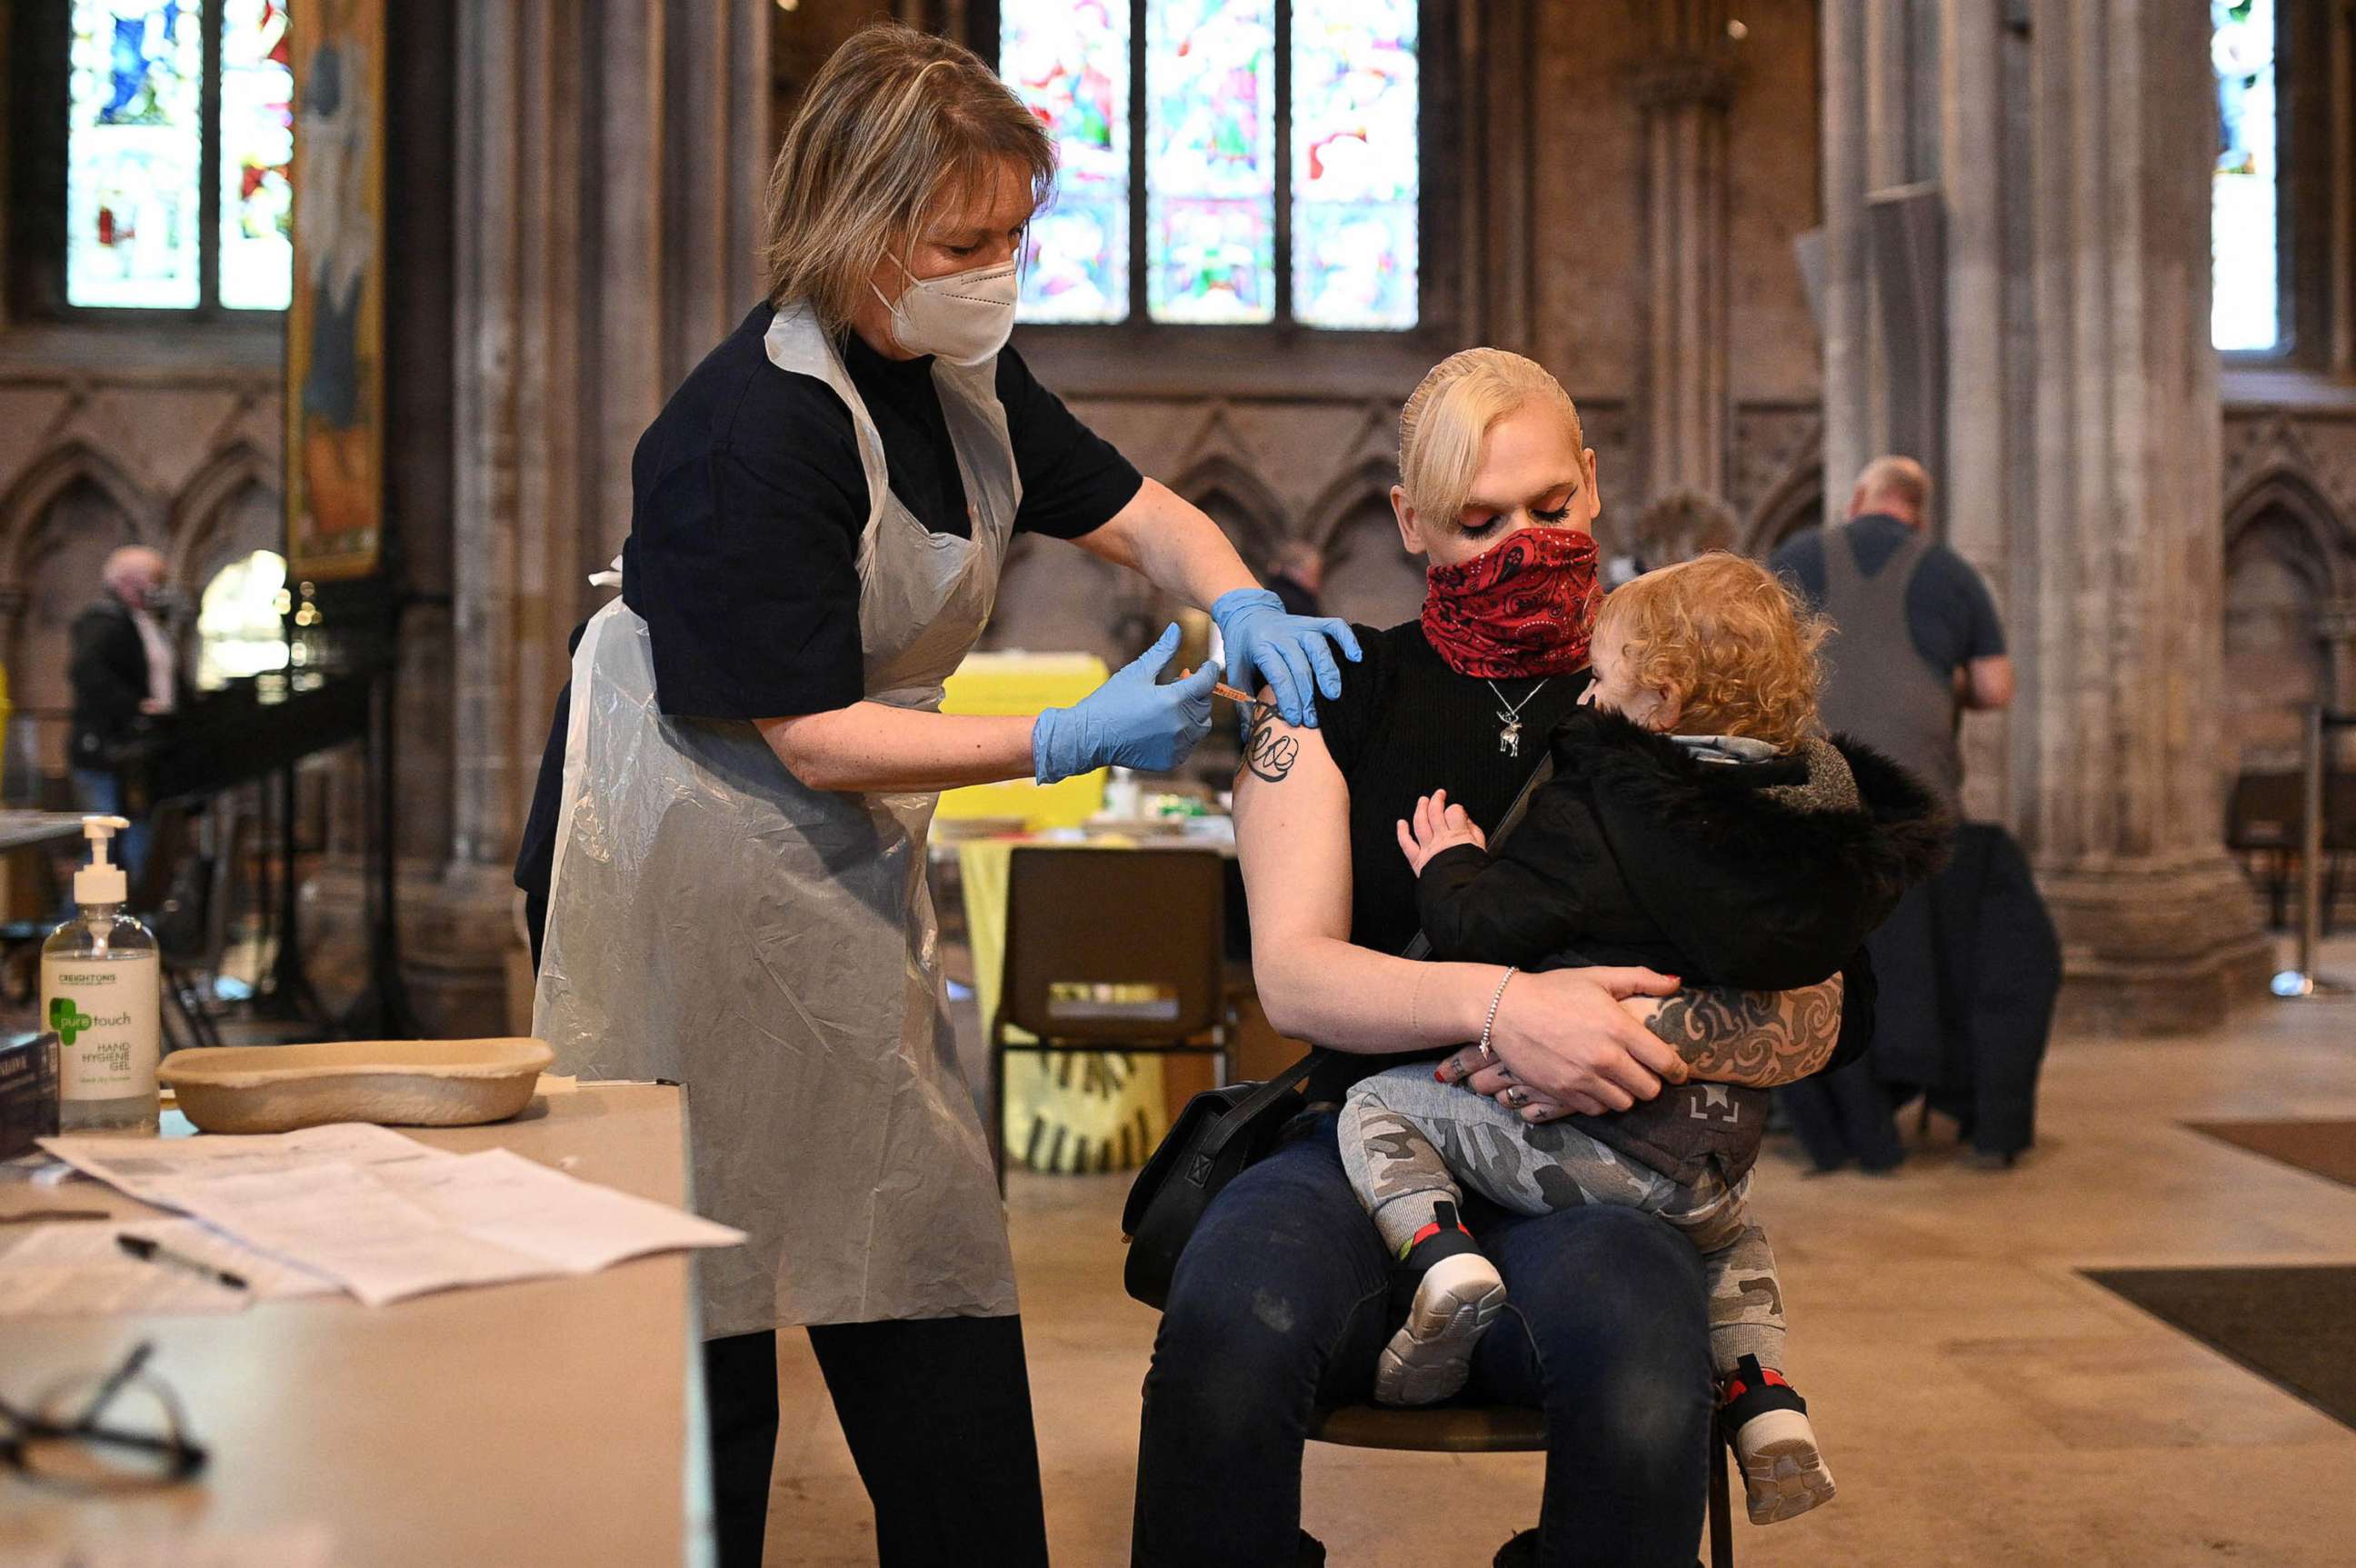 PHOTO: Members of the public receive a dose of the AstraZeneca/Oxford Covid-19 vaccine at Lichfield cathedral, which has been converted into a temporary vaccination centre, in Lichfield, England, on March 18, 2021.